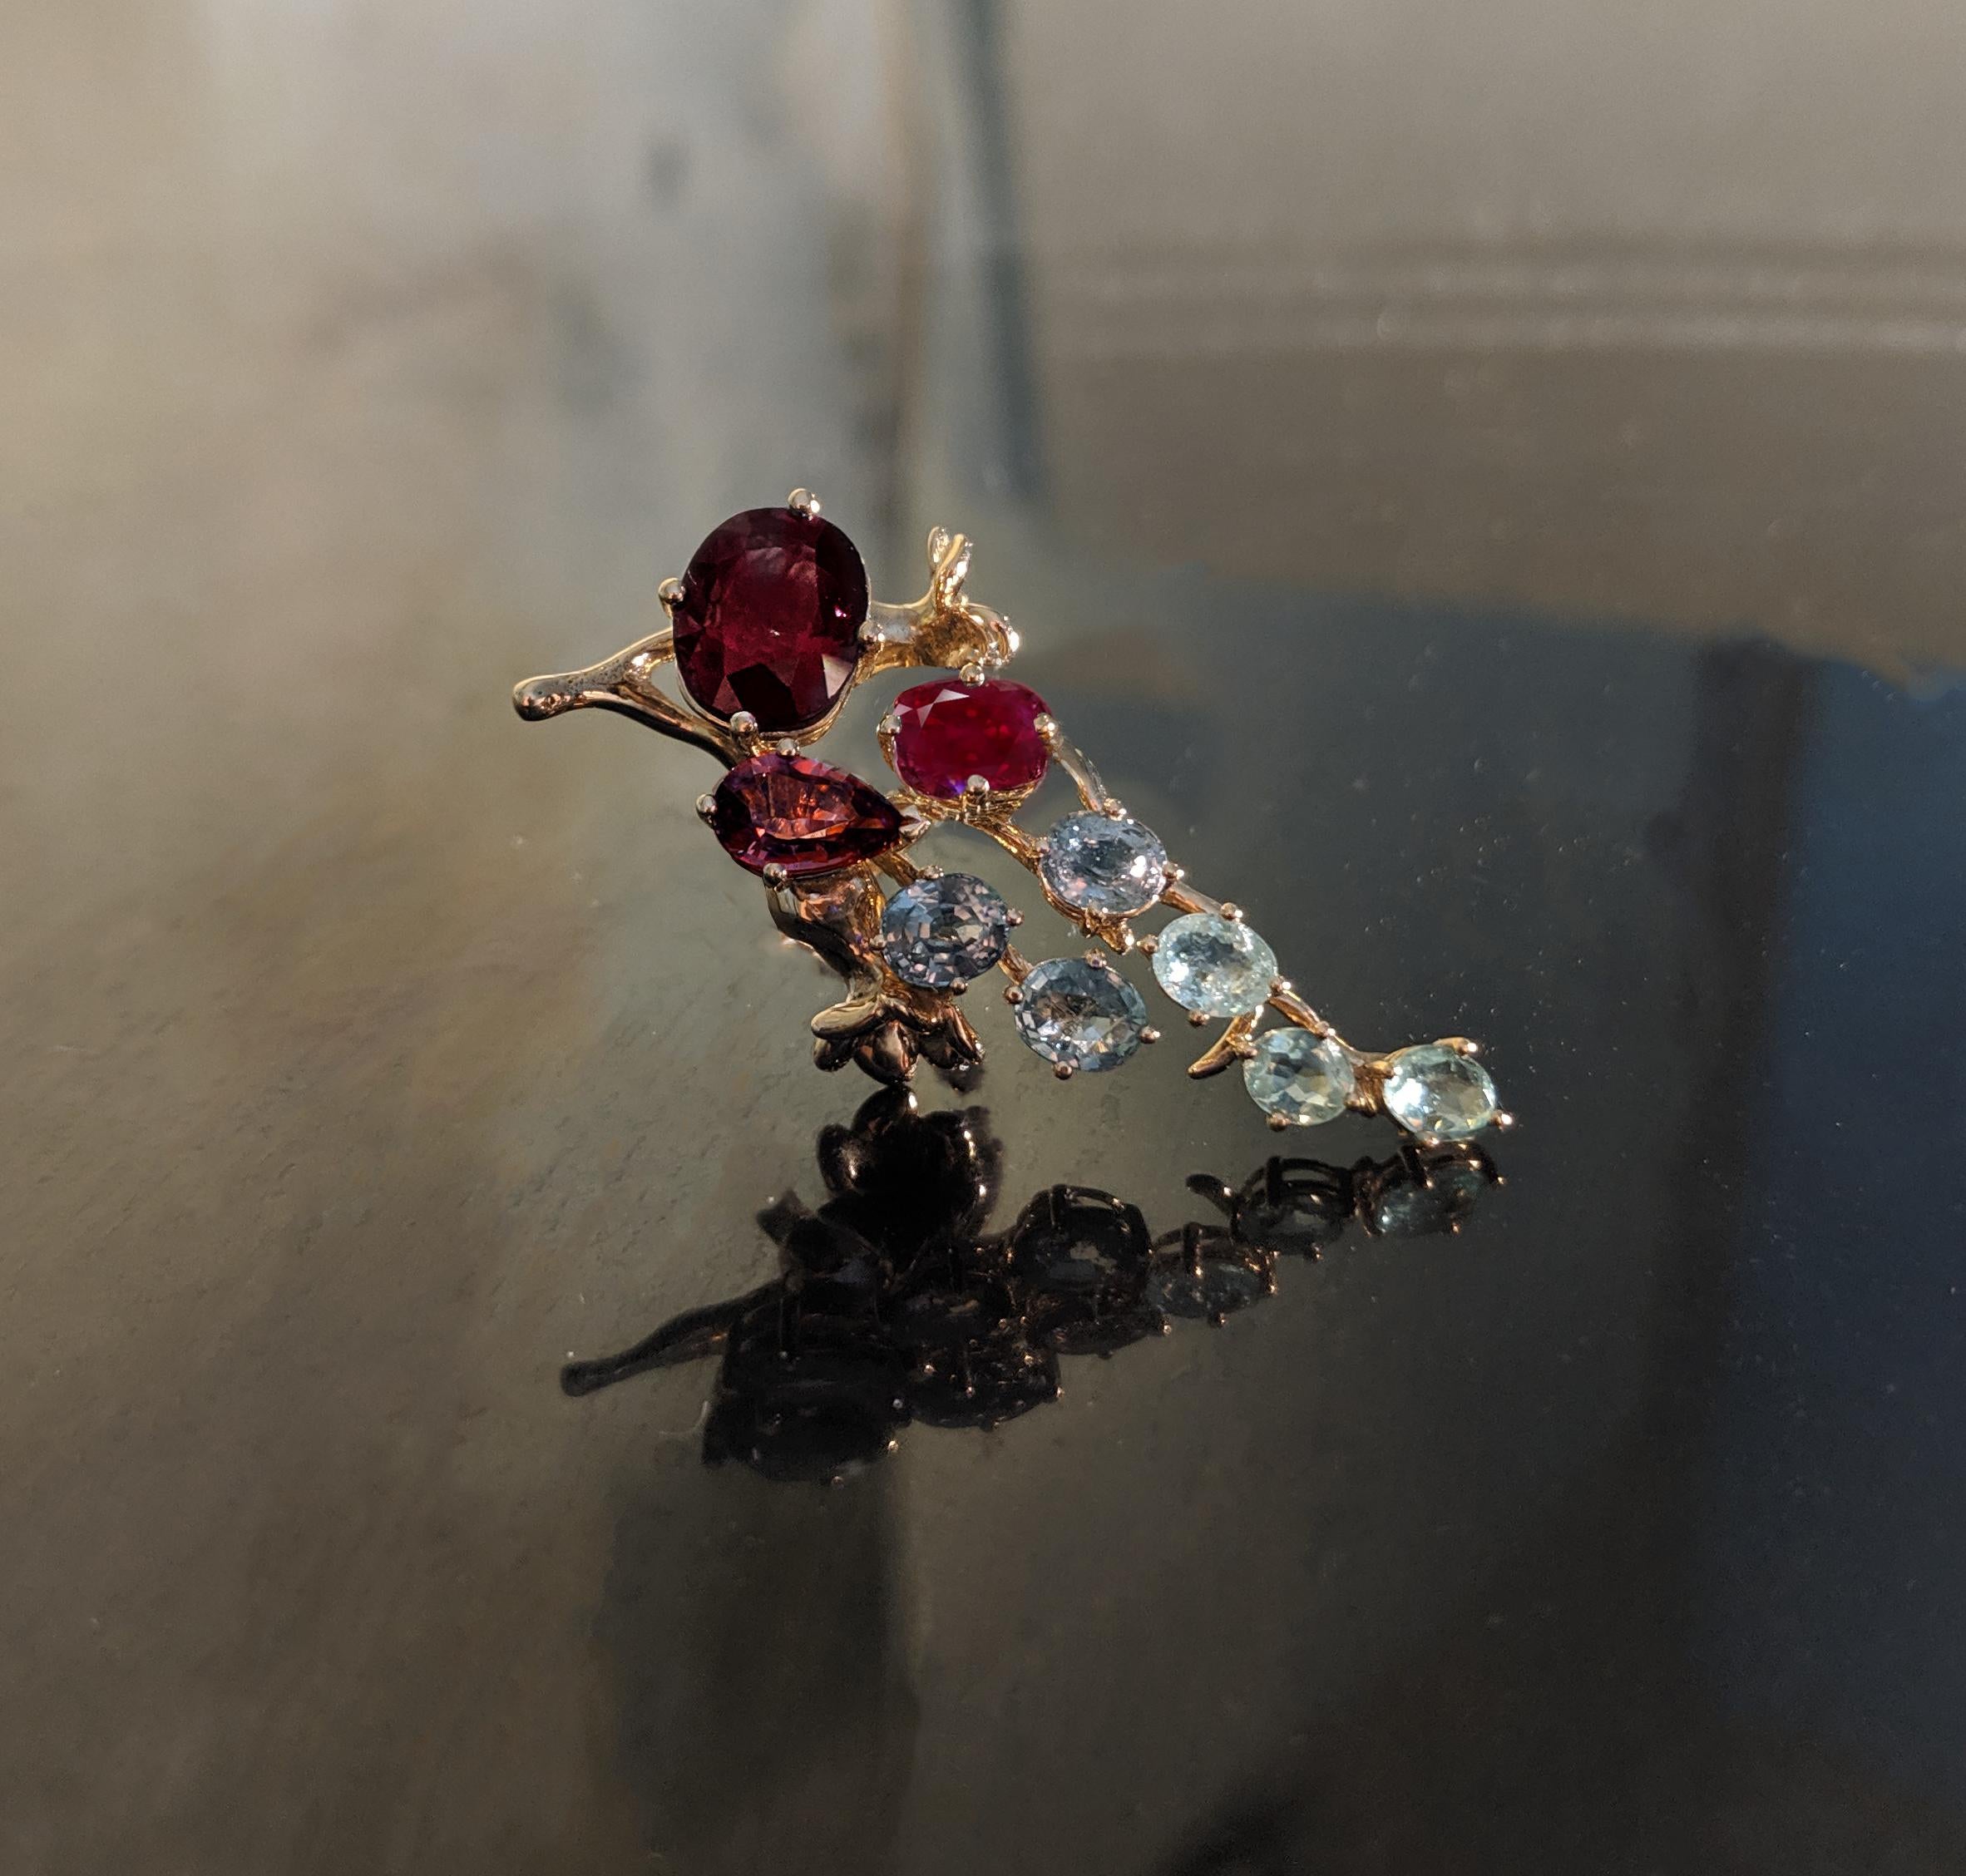 This Tobacco Flower brooch is made of 18 karat rose gold.
The natural gems are:
Oval ruby 4,27 carats, dimension: 11,16x9,36 mm.
Oval ruby 0,98 carats, 7x5,5 mm.
Oval ruby warmer tone, 1,01 carats, 6,5x6 mm.
Pear cut rubellite, 1,68 carats, 9,5x73